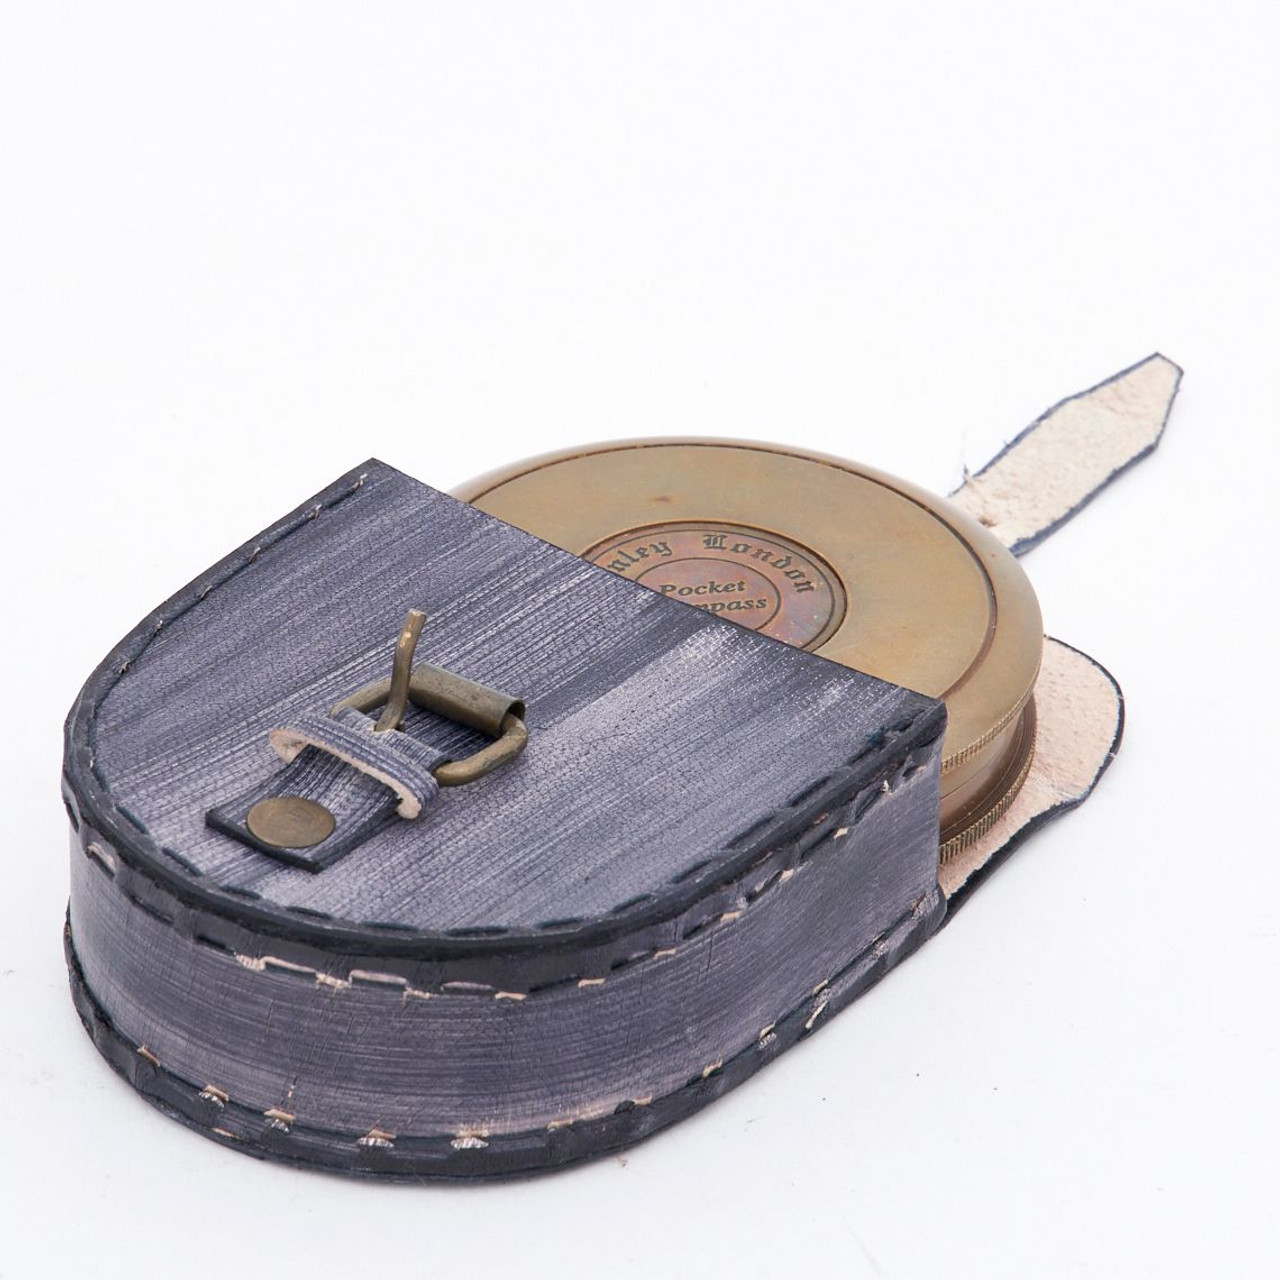 Compass w/Lid & Leather Case - Antiqued Brass